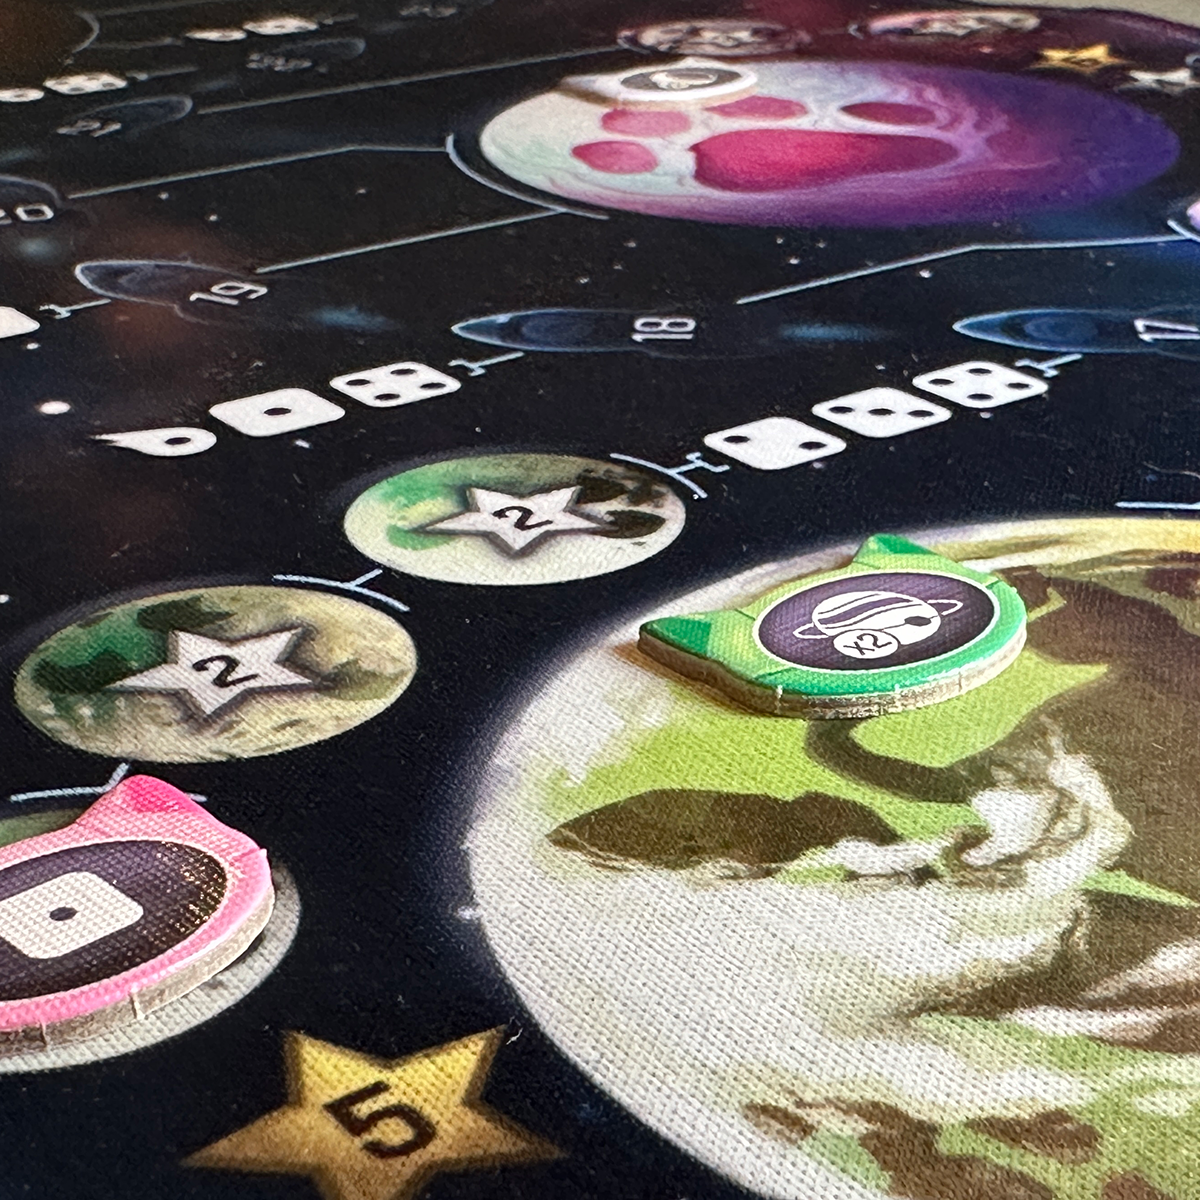 MLEM Space Agency Board Game Review Token on Planet